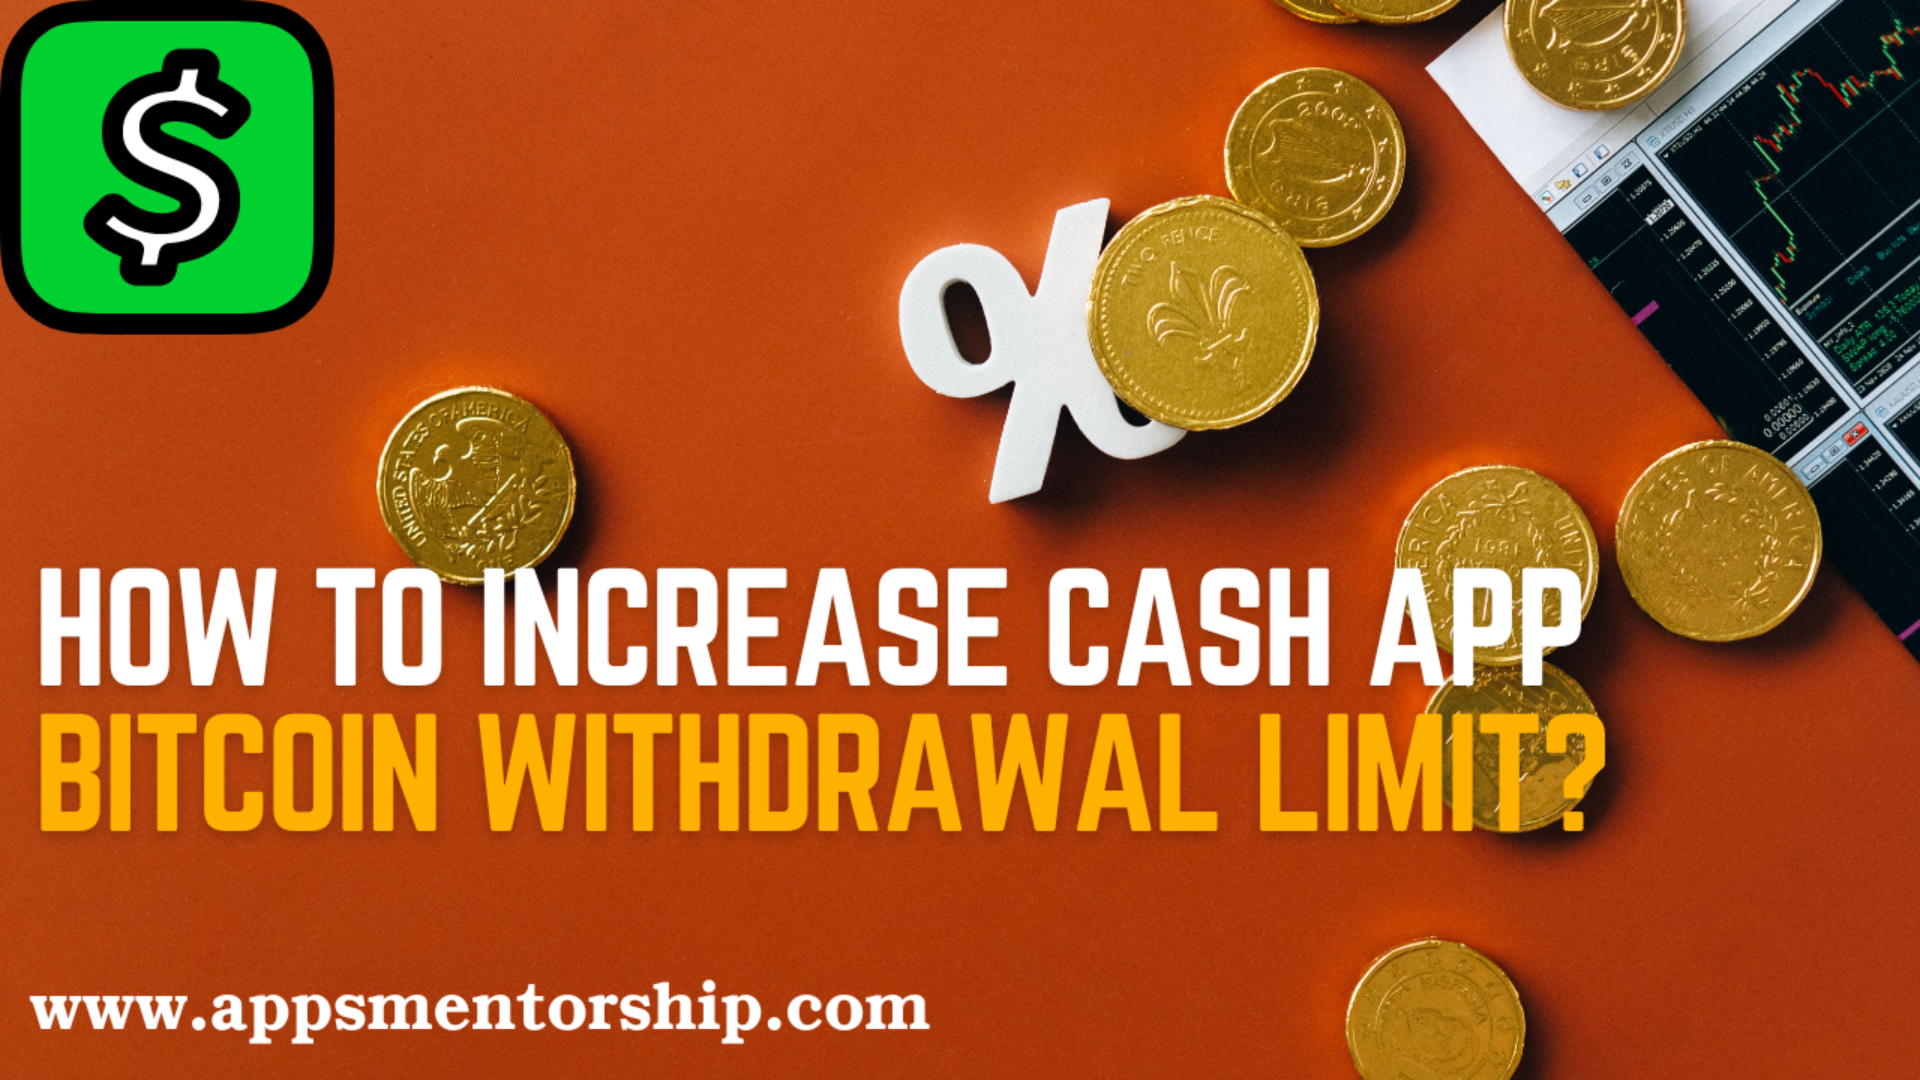 How to Increase Cash App Bitcoin Withdrawal or Sending Limit? – cash app limit